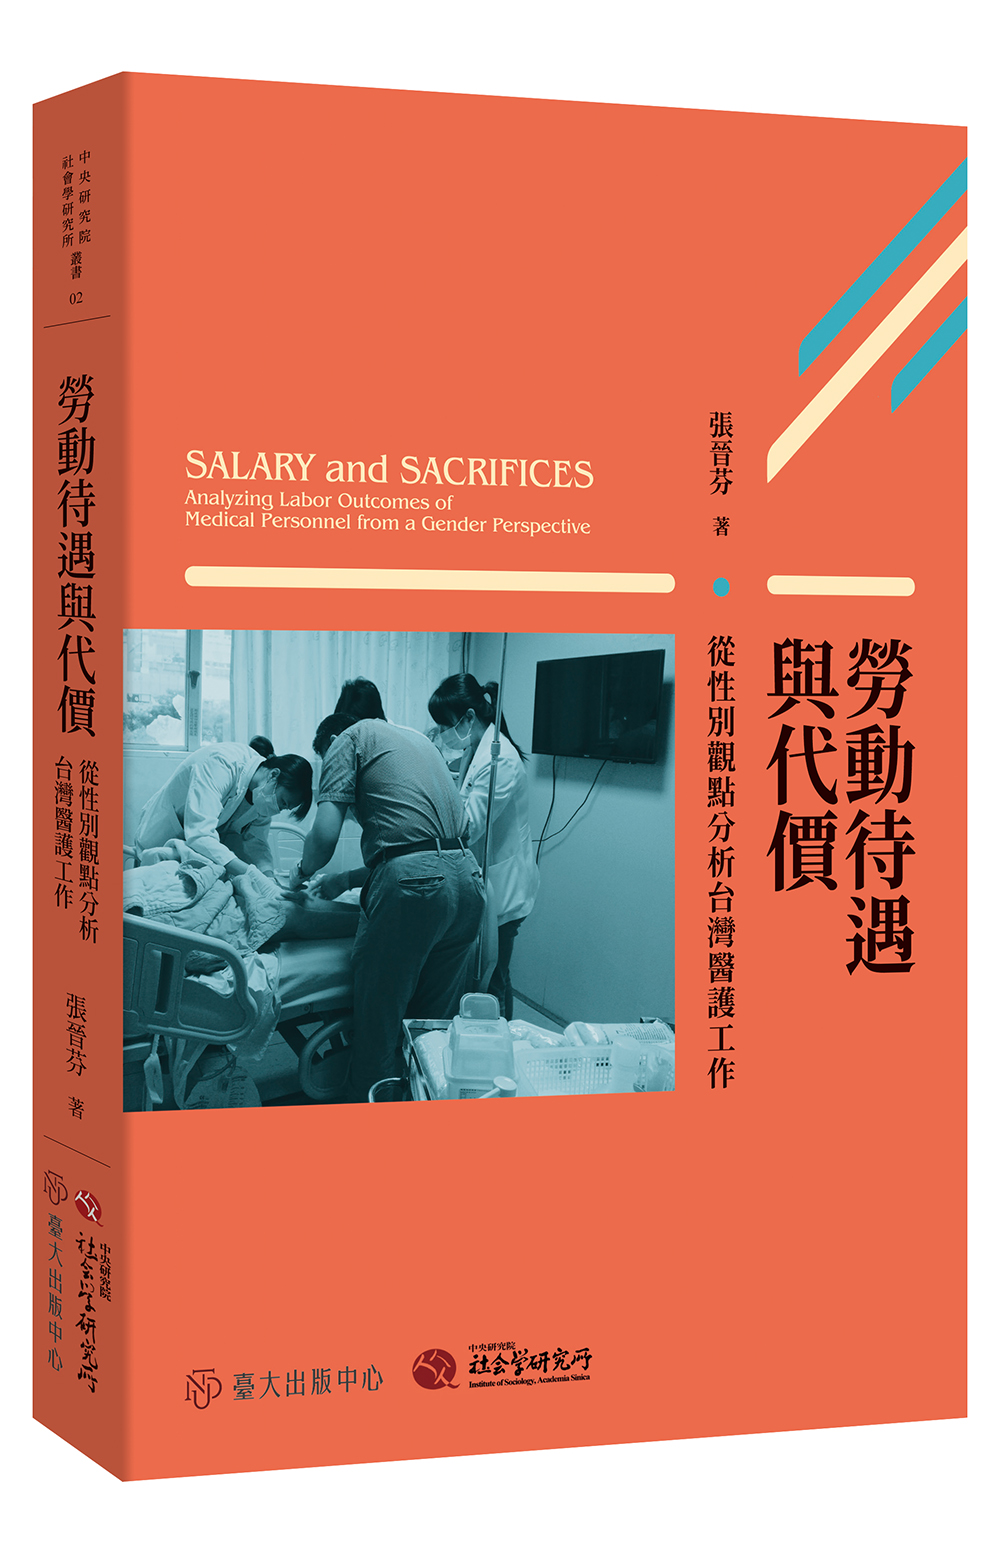 Salary and Sacrifices: Analyzing Labor Outcomes of Medical Personnel from a Gender Perspective